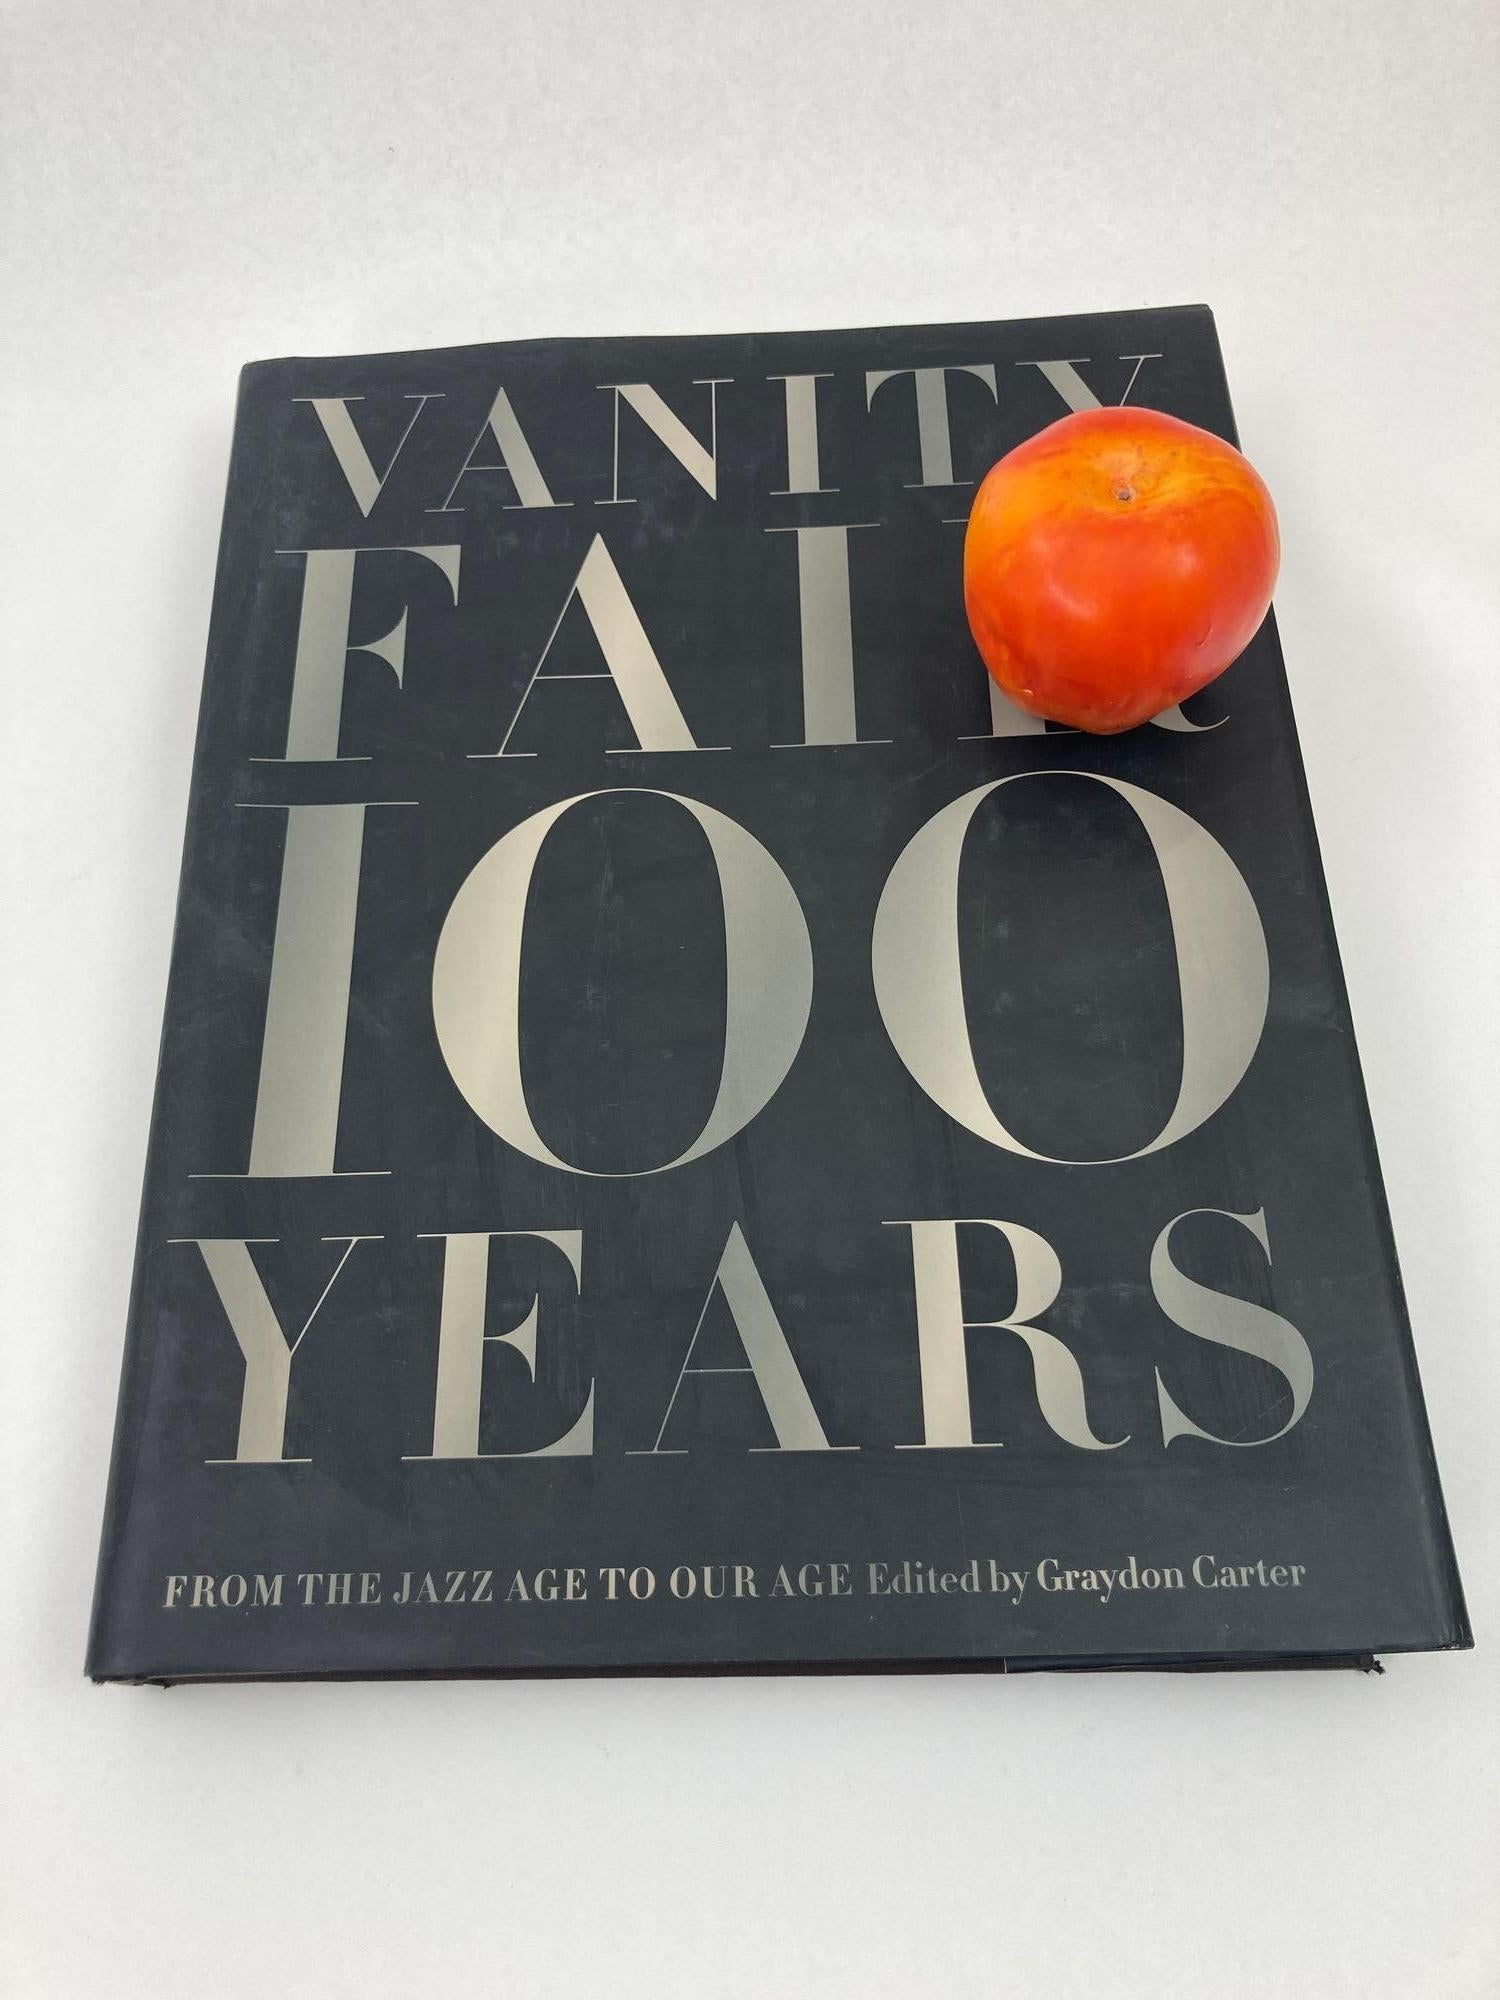 Vanity Fair 100 Years From the Jazz Age to Our Age 2013 Großes Hardcoverbuch (Hollywood Regency) im Angebot